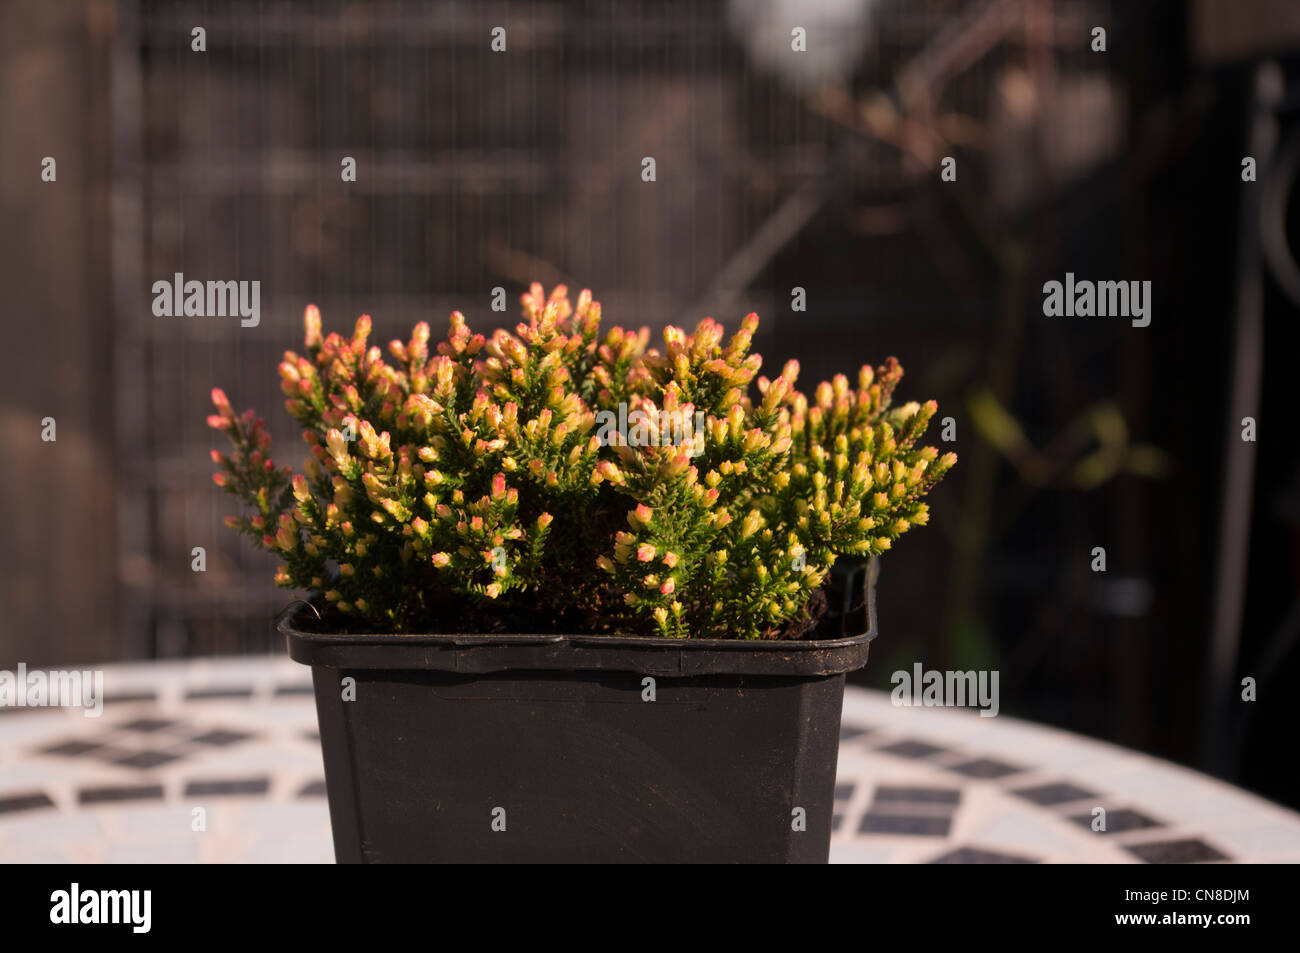 Hardy Potted Garden Heather Easter Bonfire Stock Photo